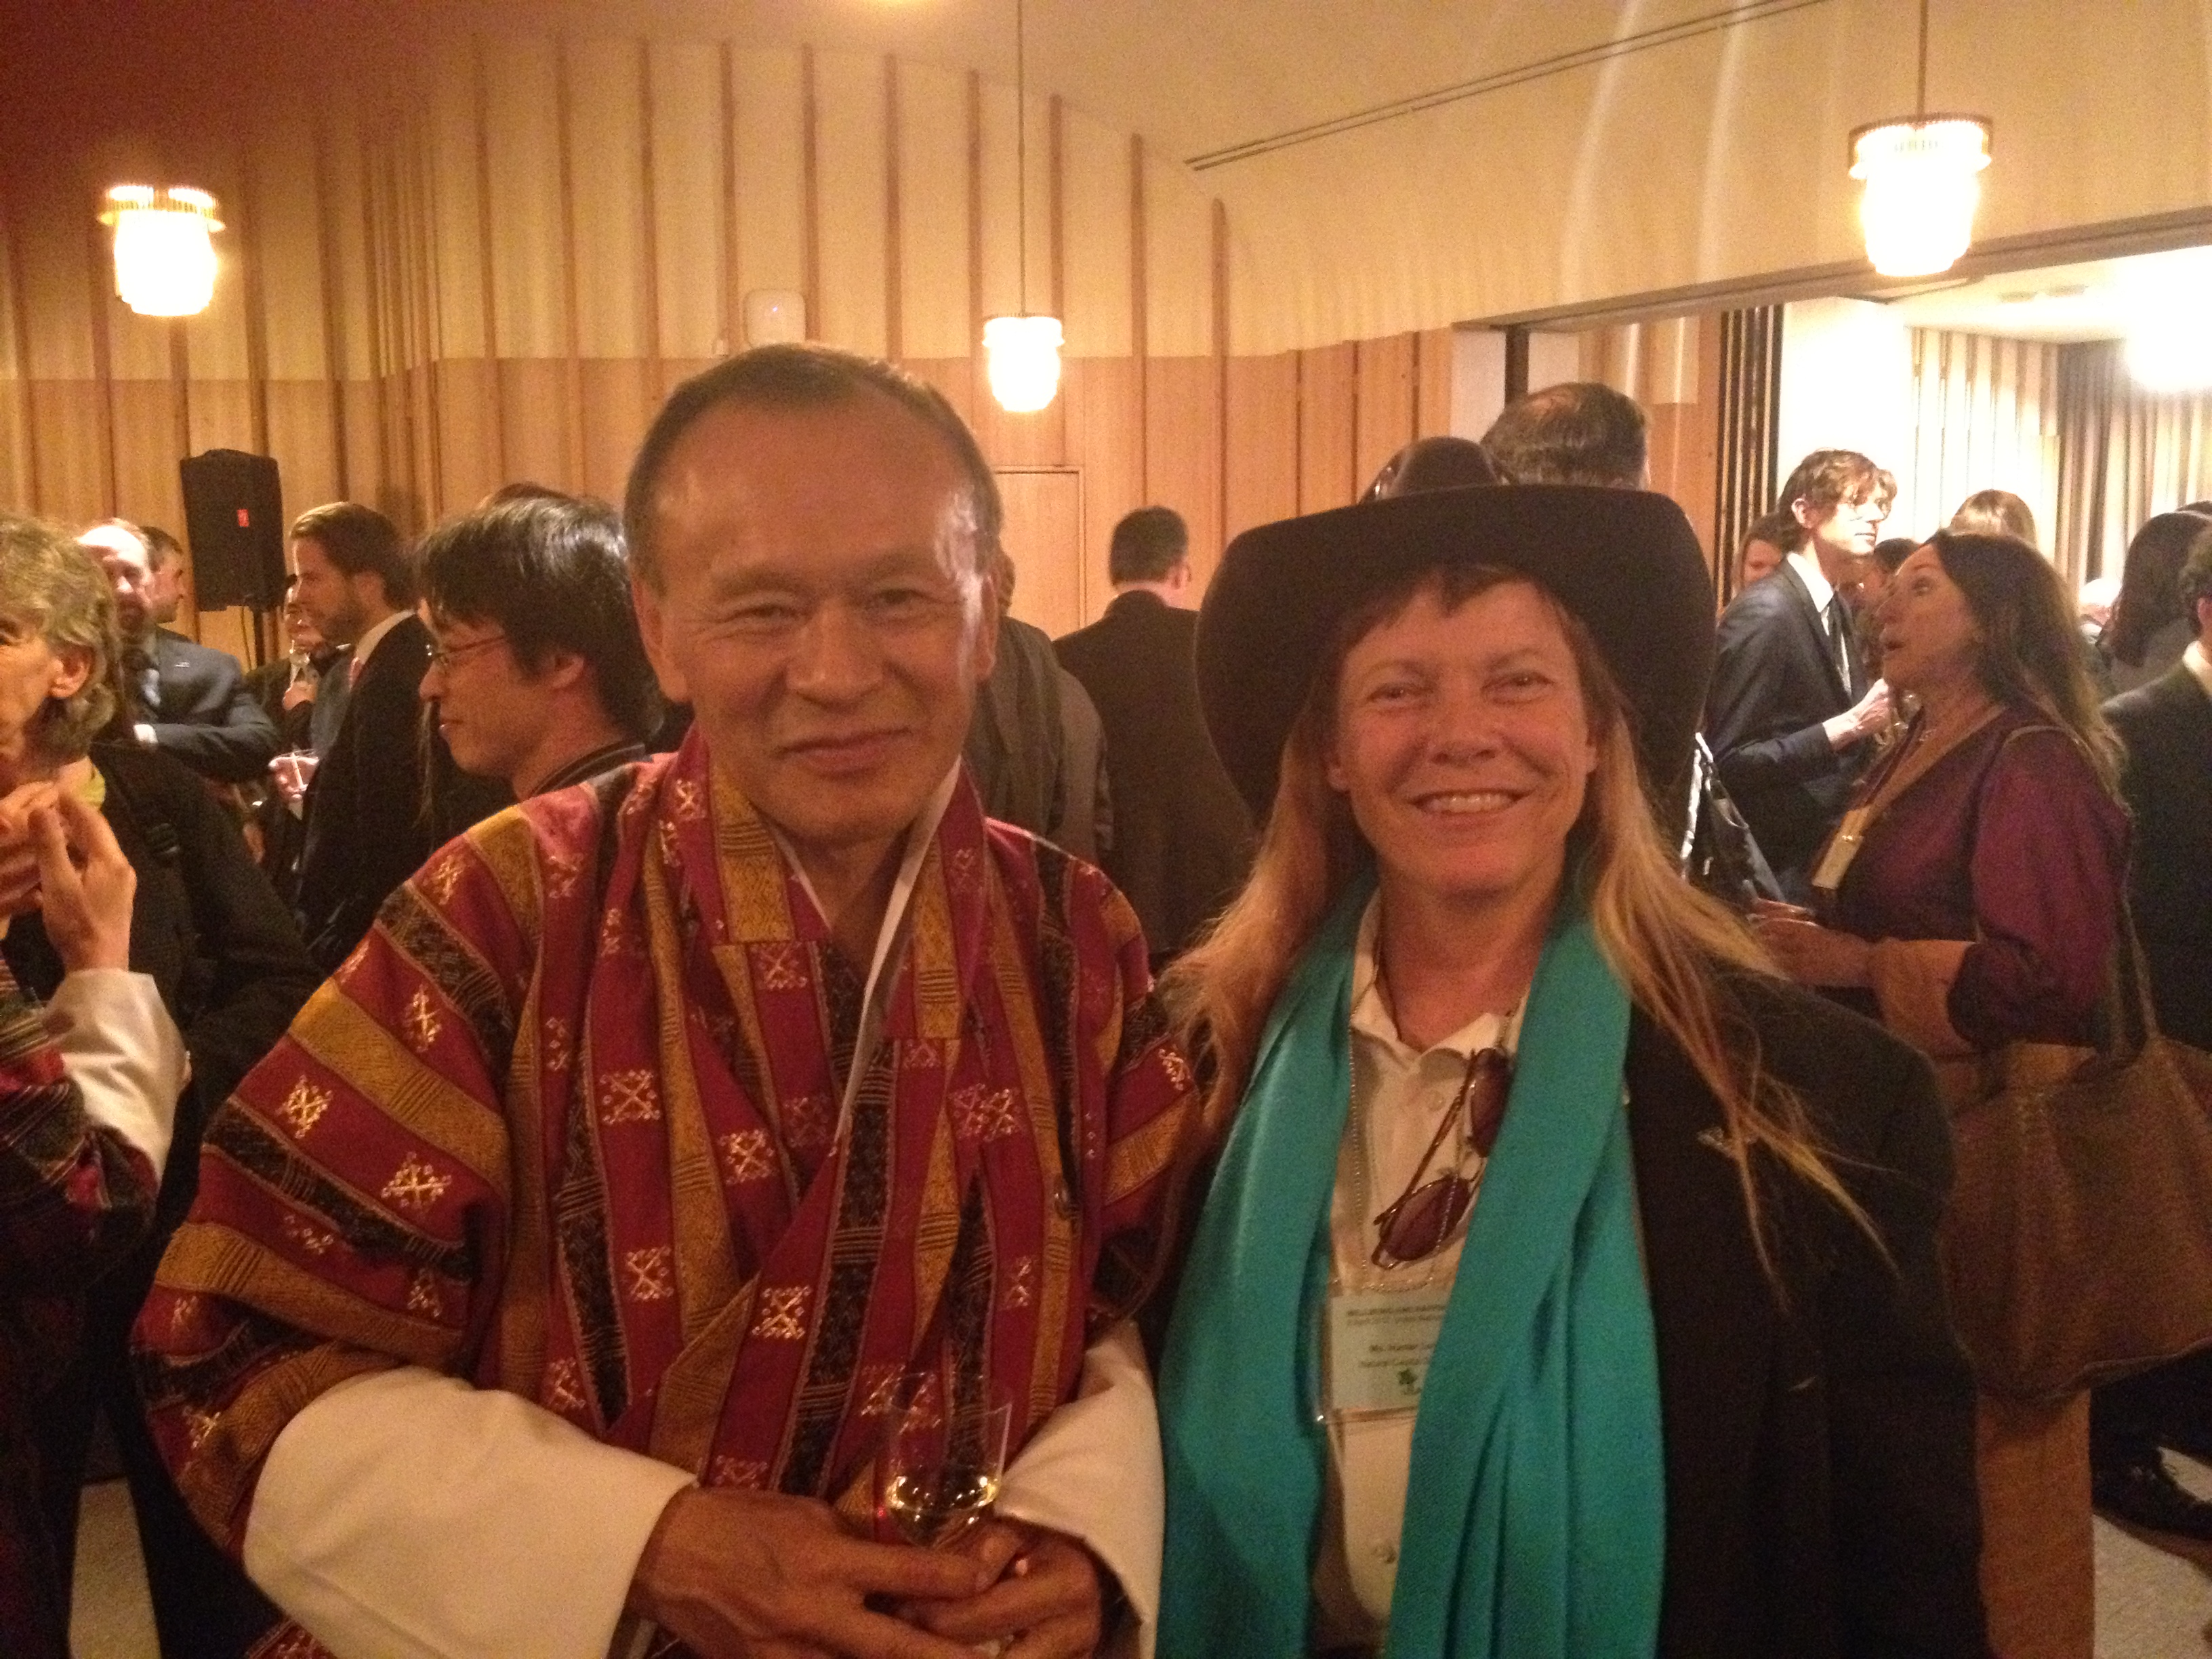 Hunter Lovins with His Excellency, Jigmi Thinley, the Bhutanese Prime Minister